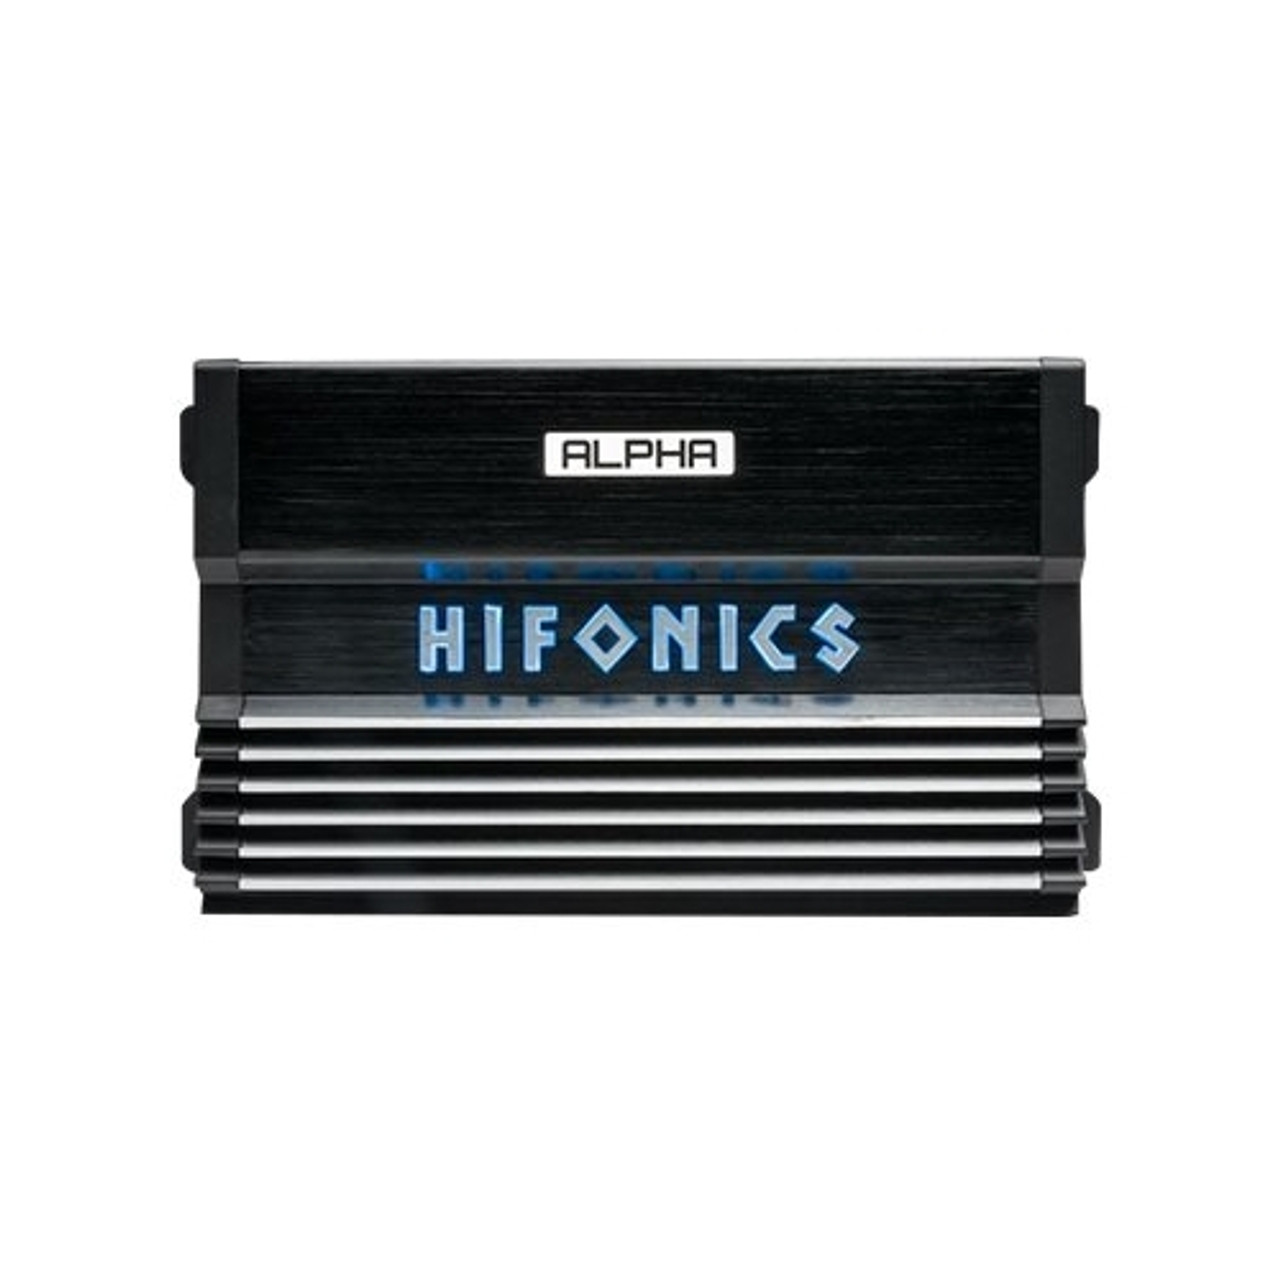 Hifonics - ALPHA 1200W Class D Digital Mono Amplifier with Variable Low-Pass Crossover - Black